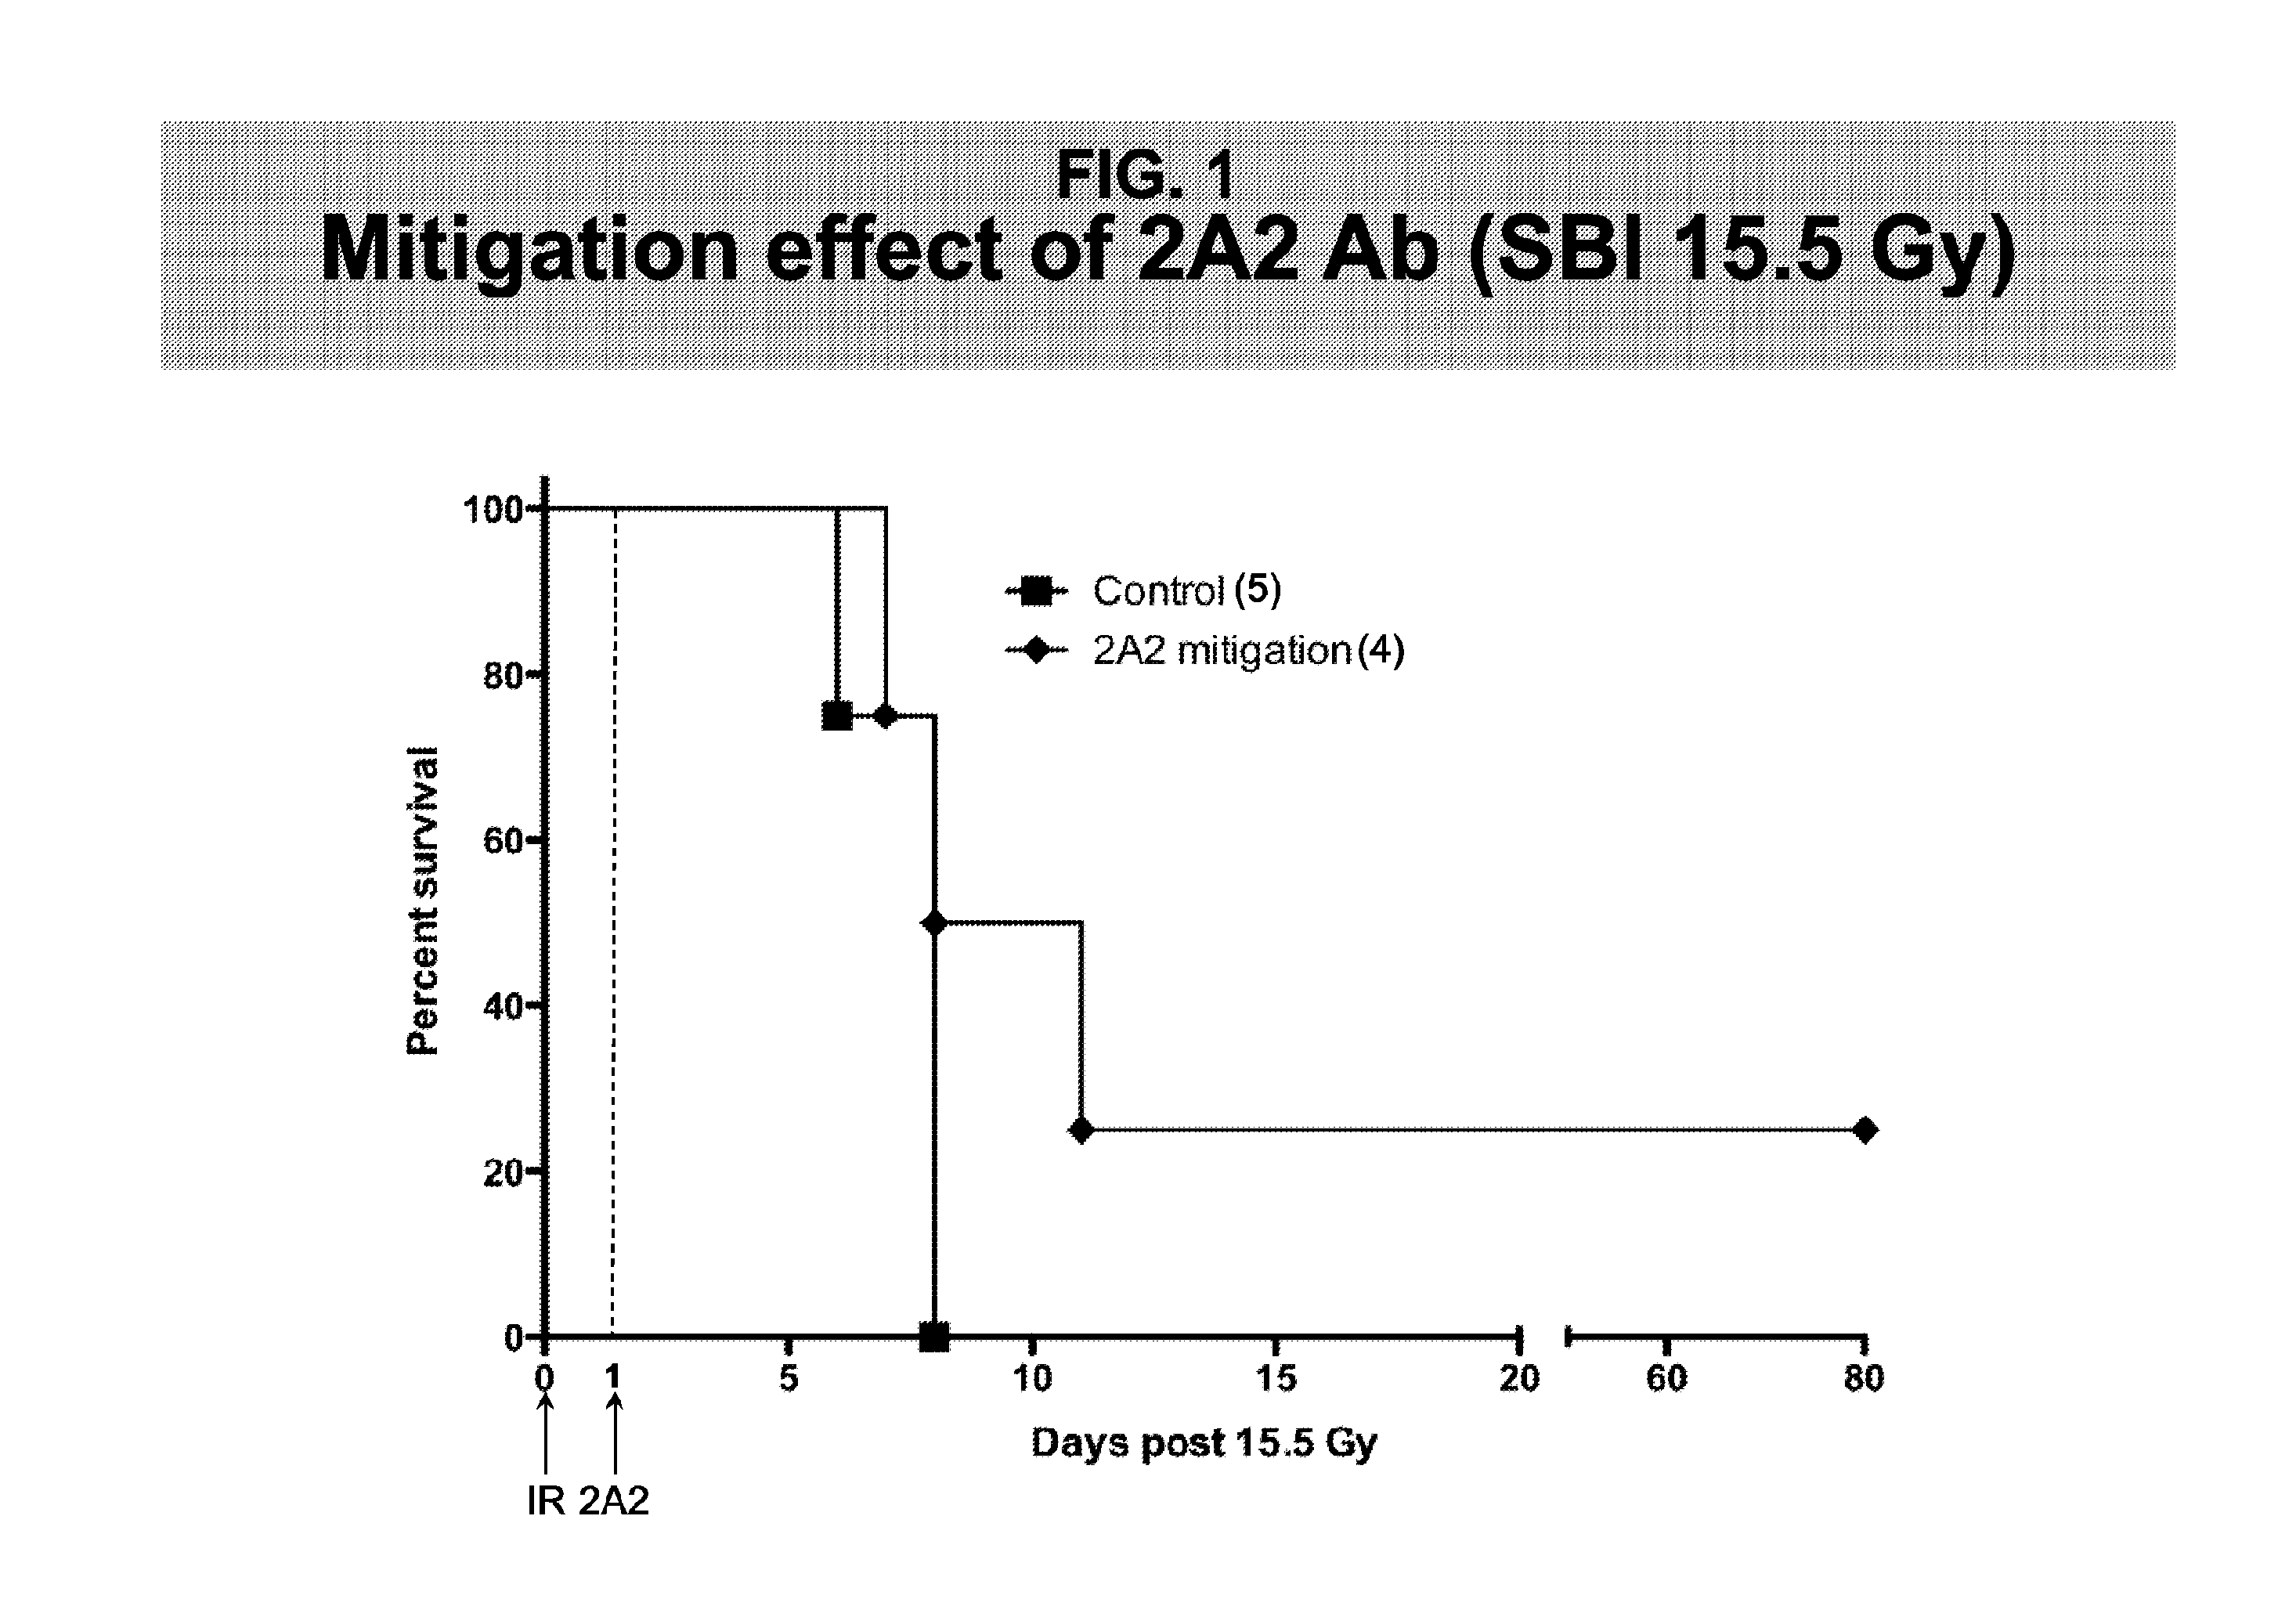 Methods for Treating GI Syndrome and Graft versus Host Disease